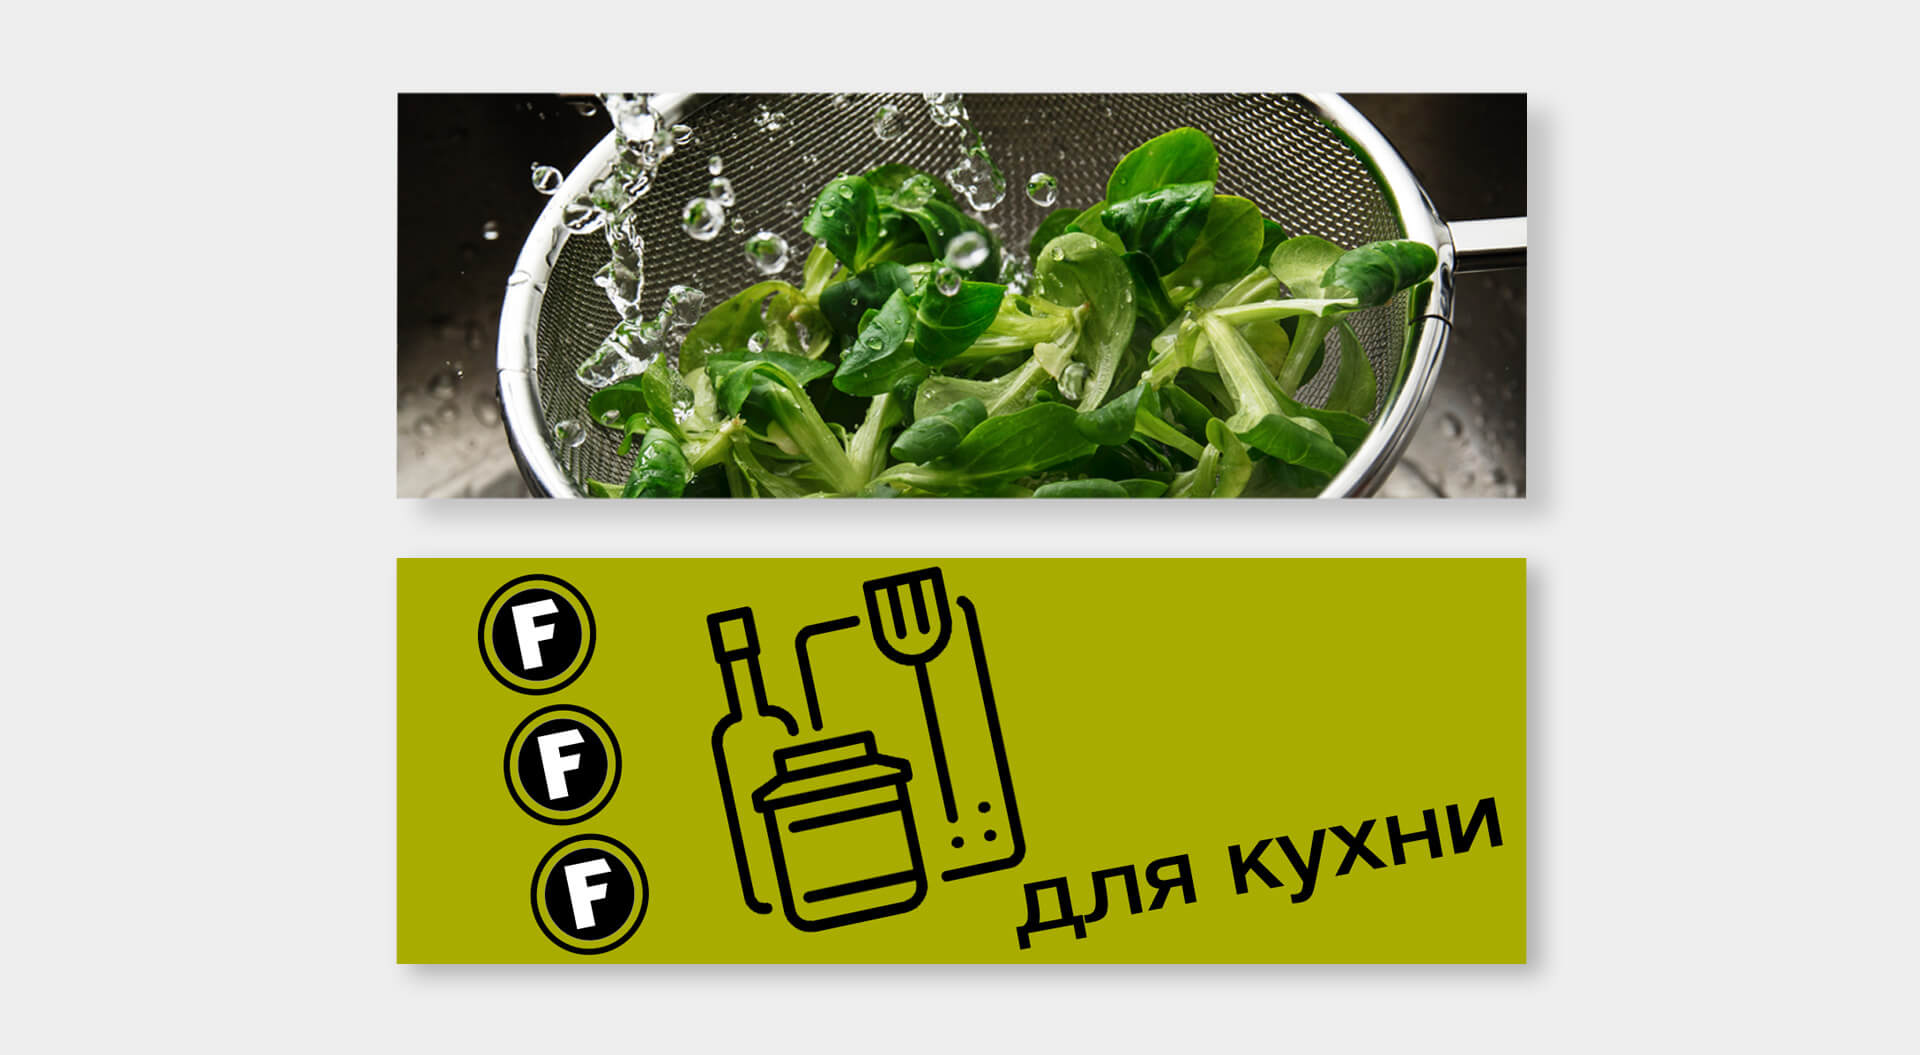 Fix Price Russia, Brand Identity, Photo Lifestyle Imagery and Icon Design, Kitchen Utensils Branding, Internal Department Signage Retail, Graphic Communications - CampbellRigg Agency